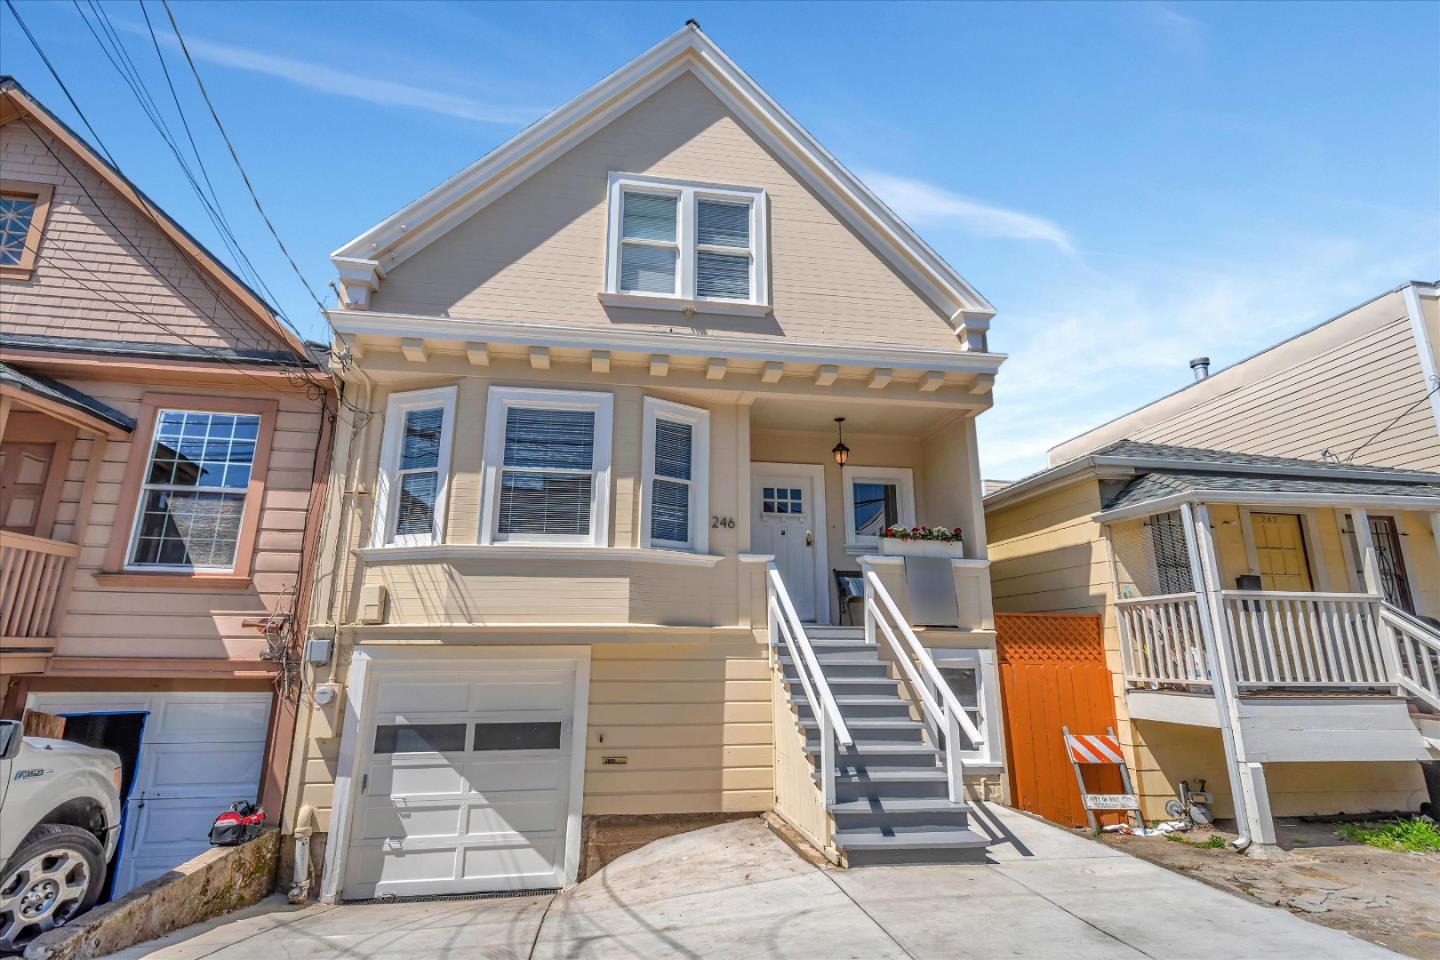 Photo of 246 Miriam St in Daly City, CA